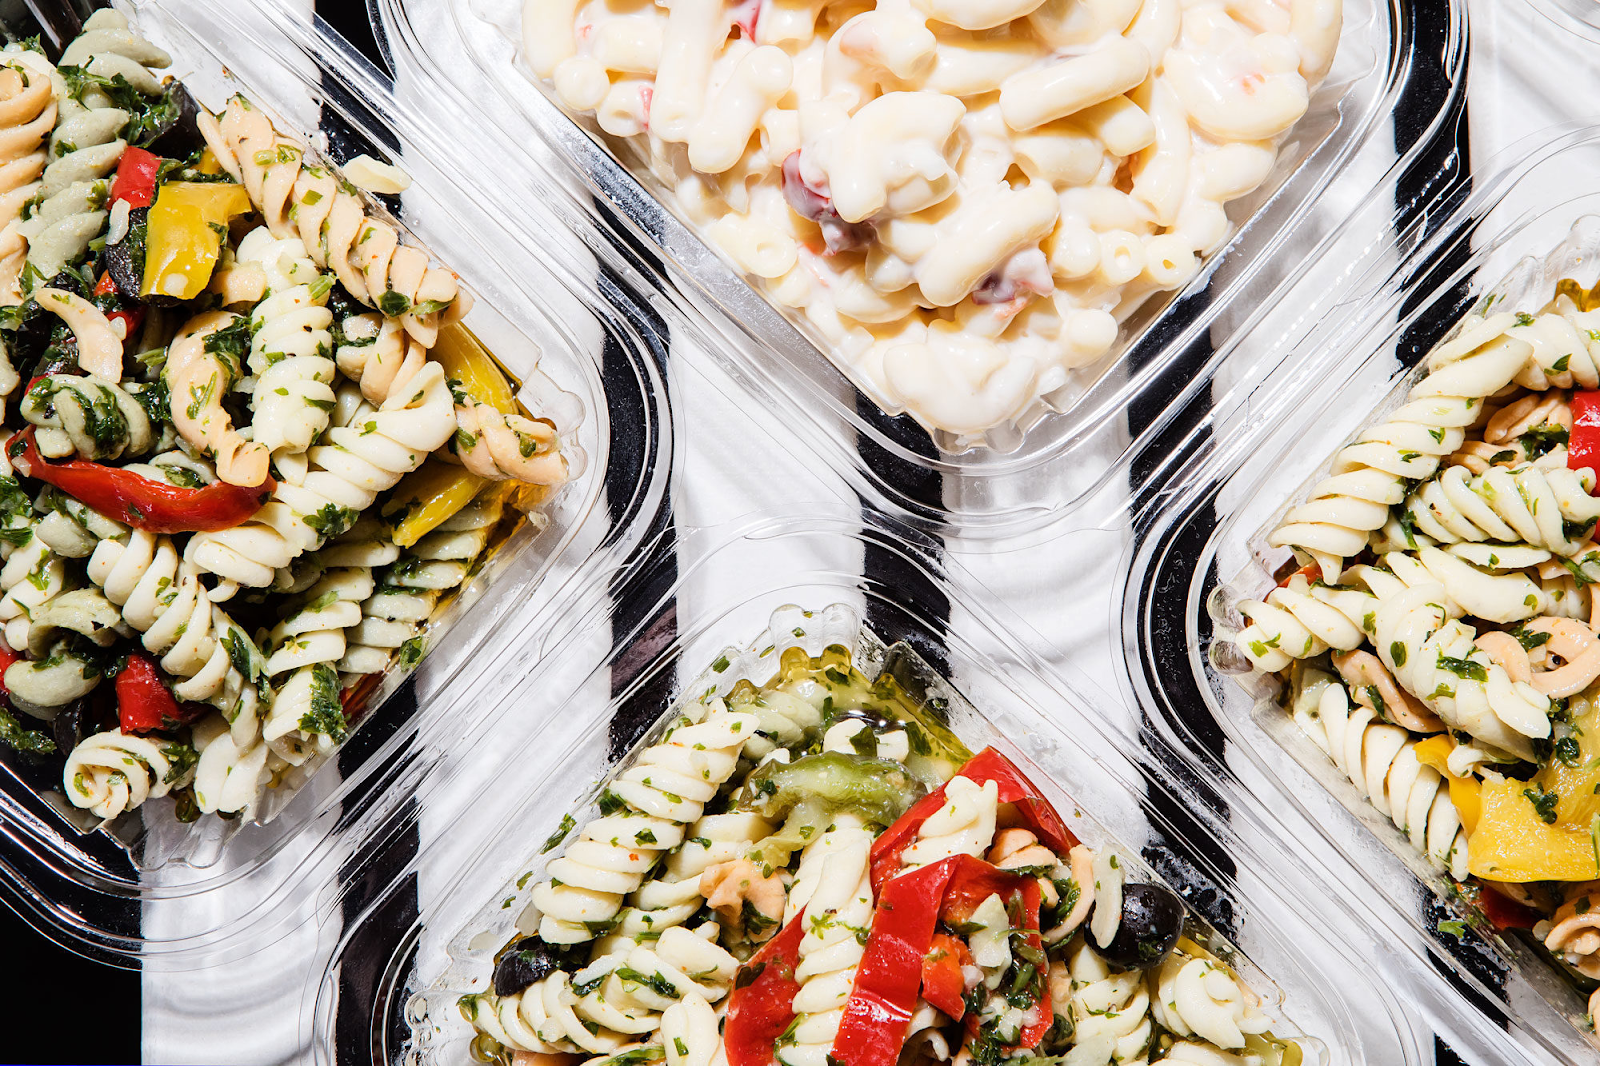 Pasta salad, a versatile and beloved dish, has a history that spans across cultures and culinary traditions